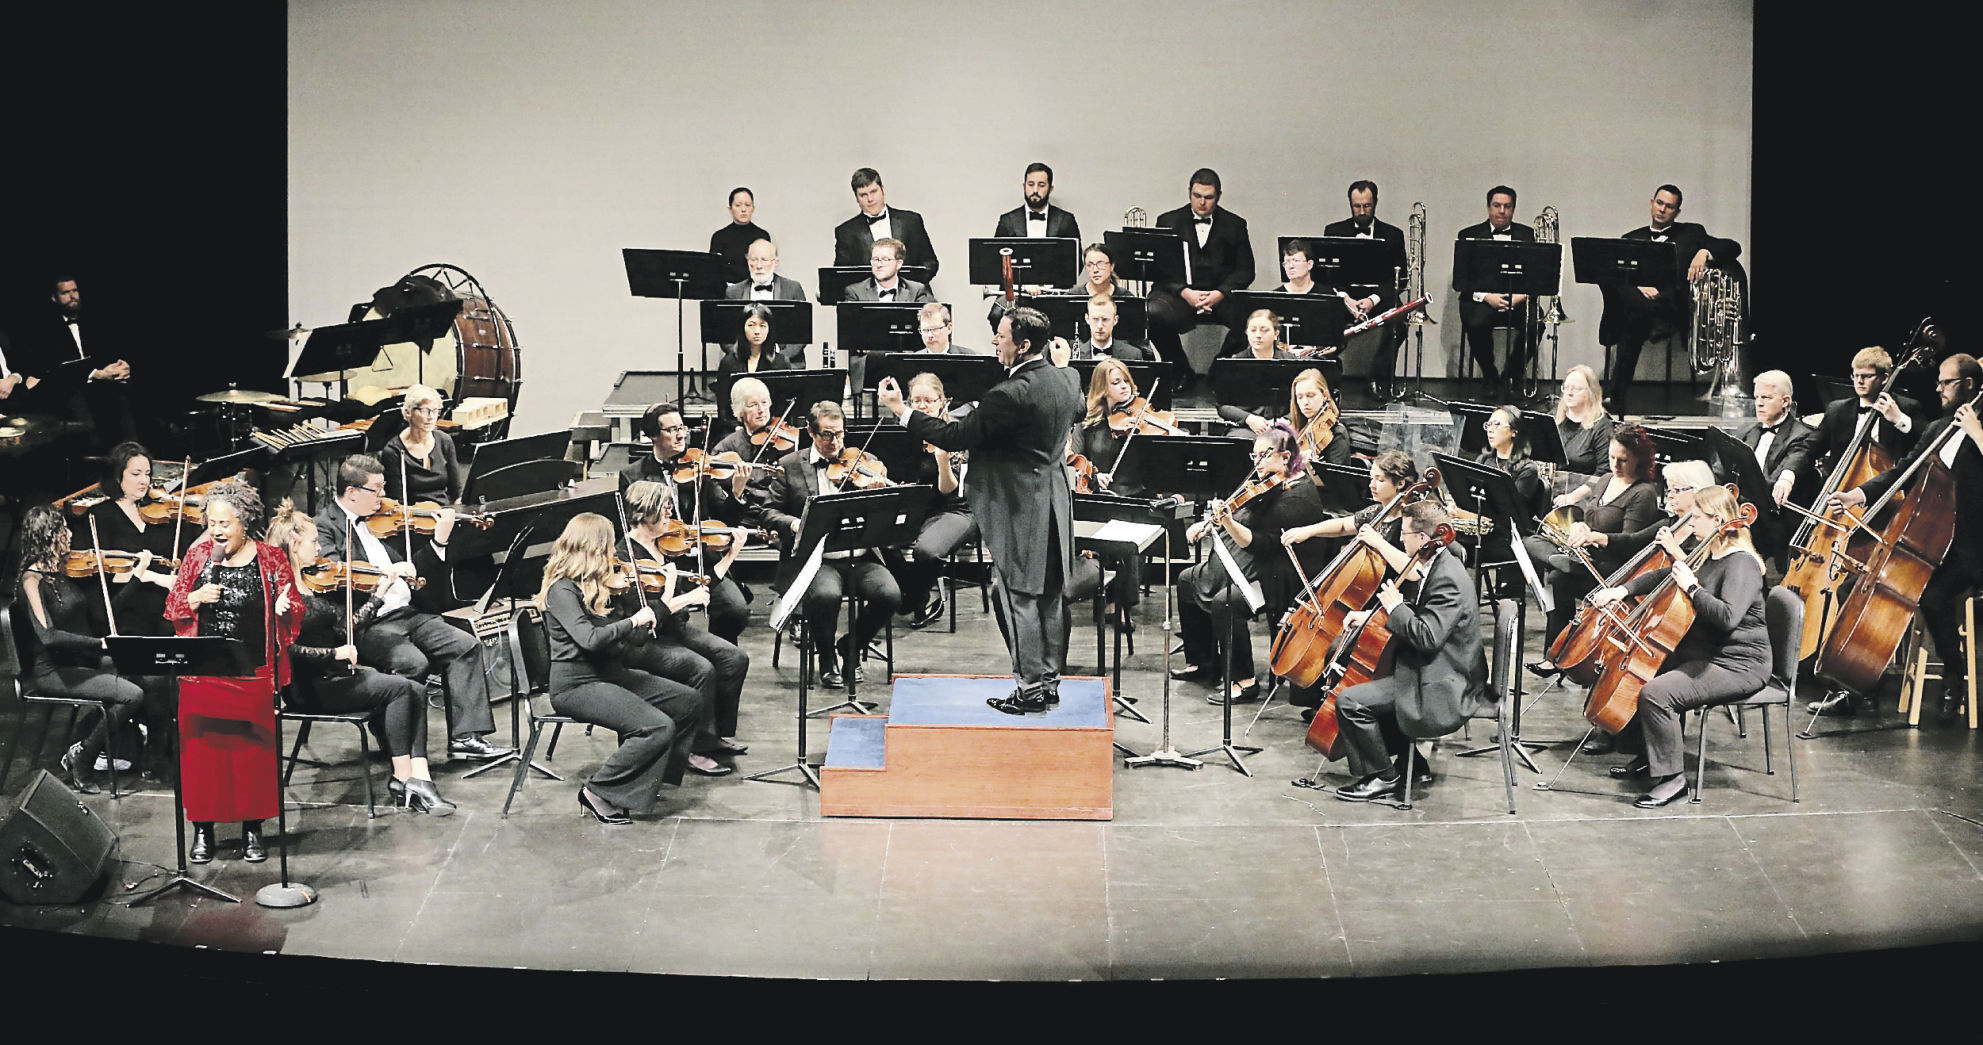 The Dubuque Symphony Orchestra performs during the Fifth Grade Arts Trek program at the Five Flags Theater in 2019. The pandemic prevented performances in 2020. PHOTO CREDIT: Jessica Reilly